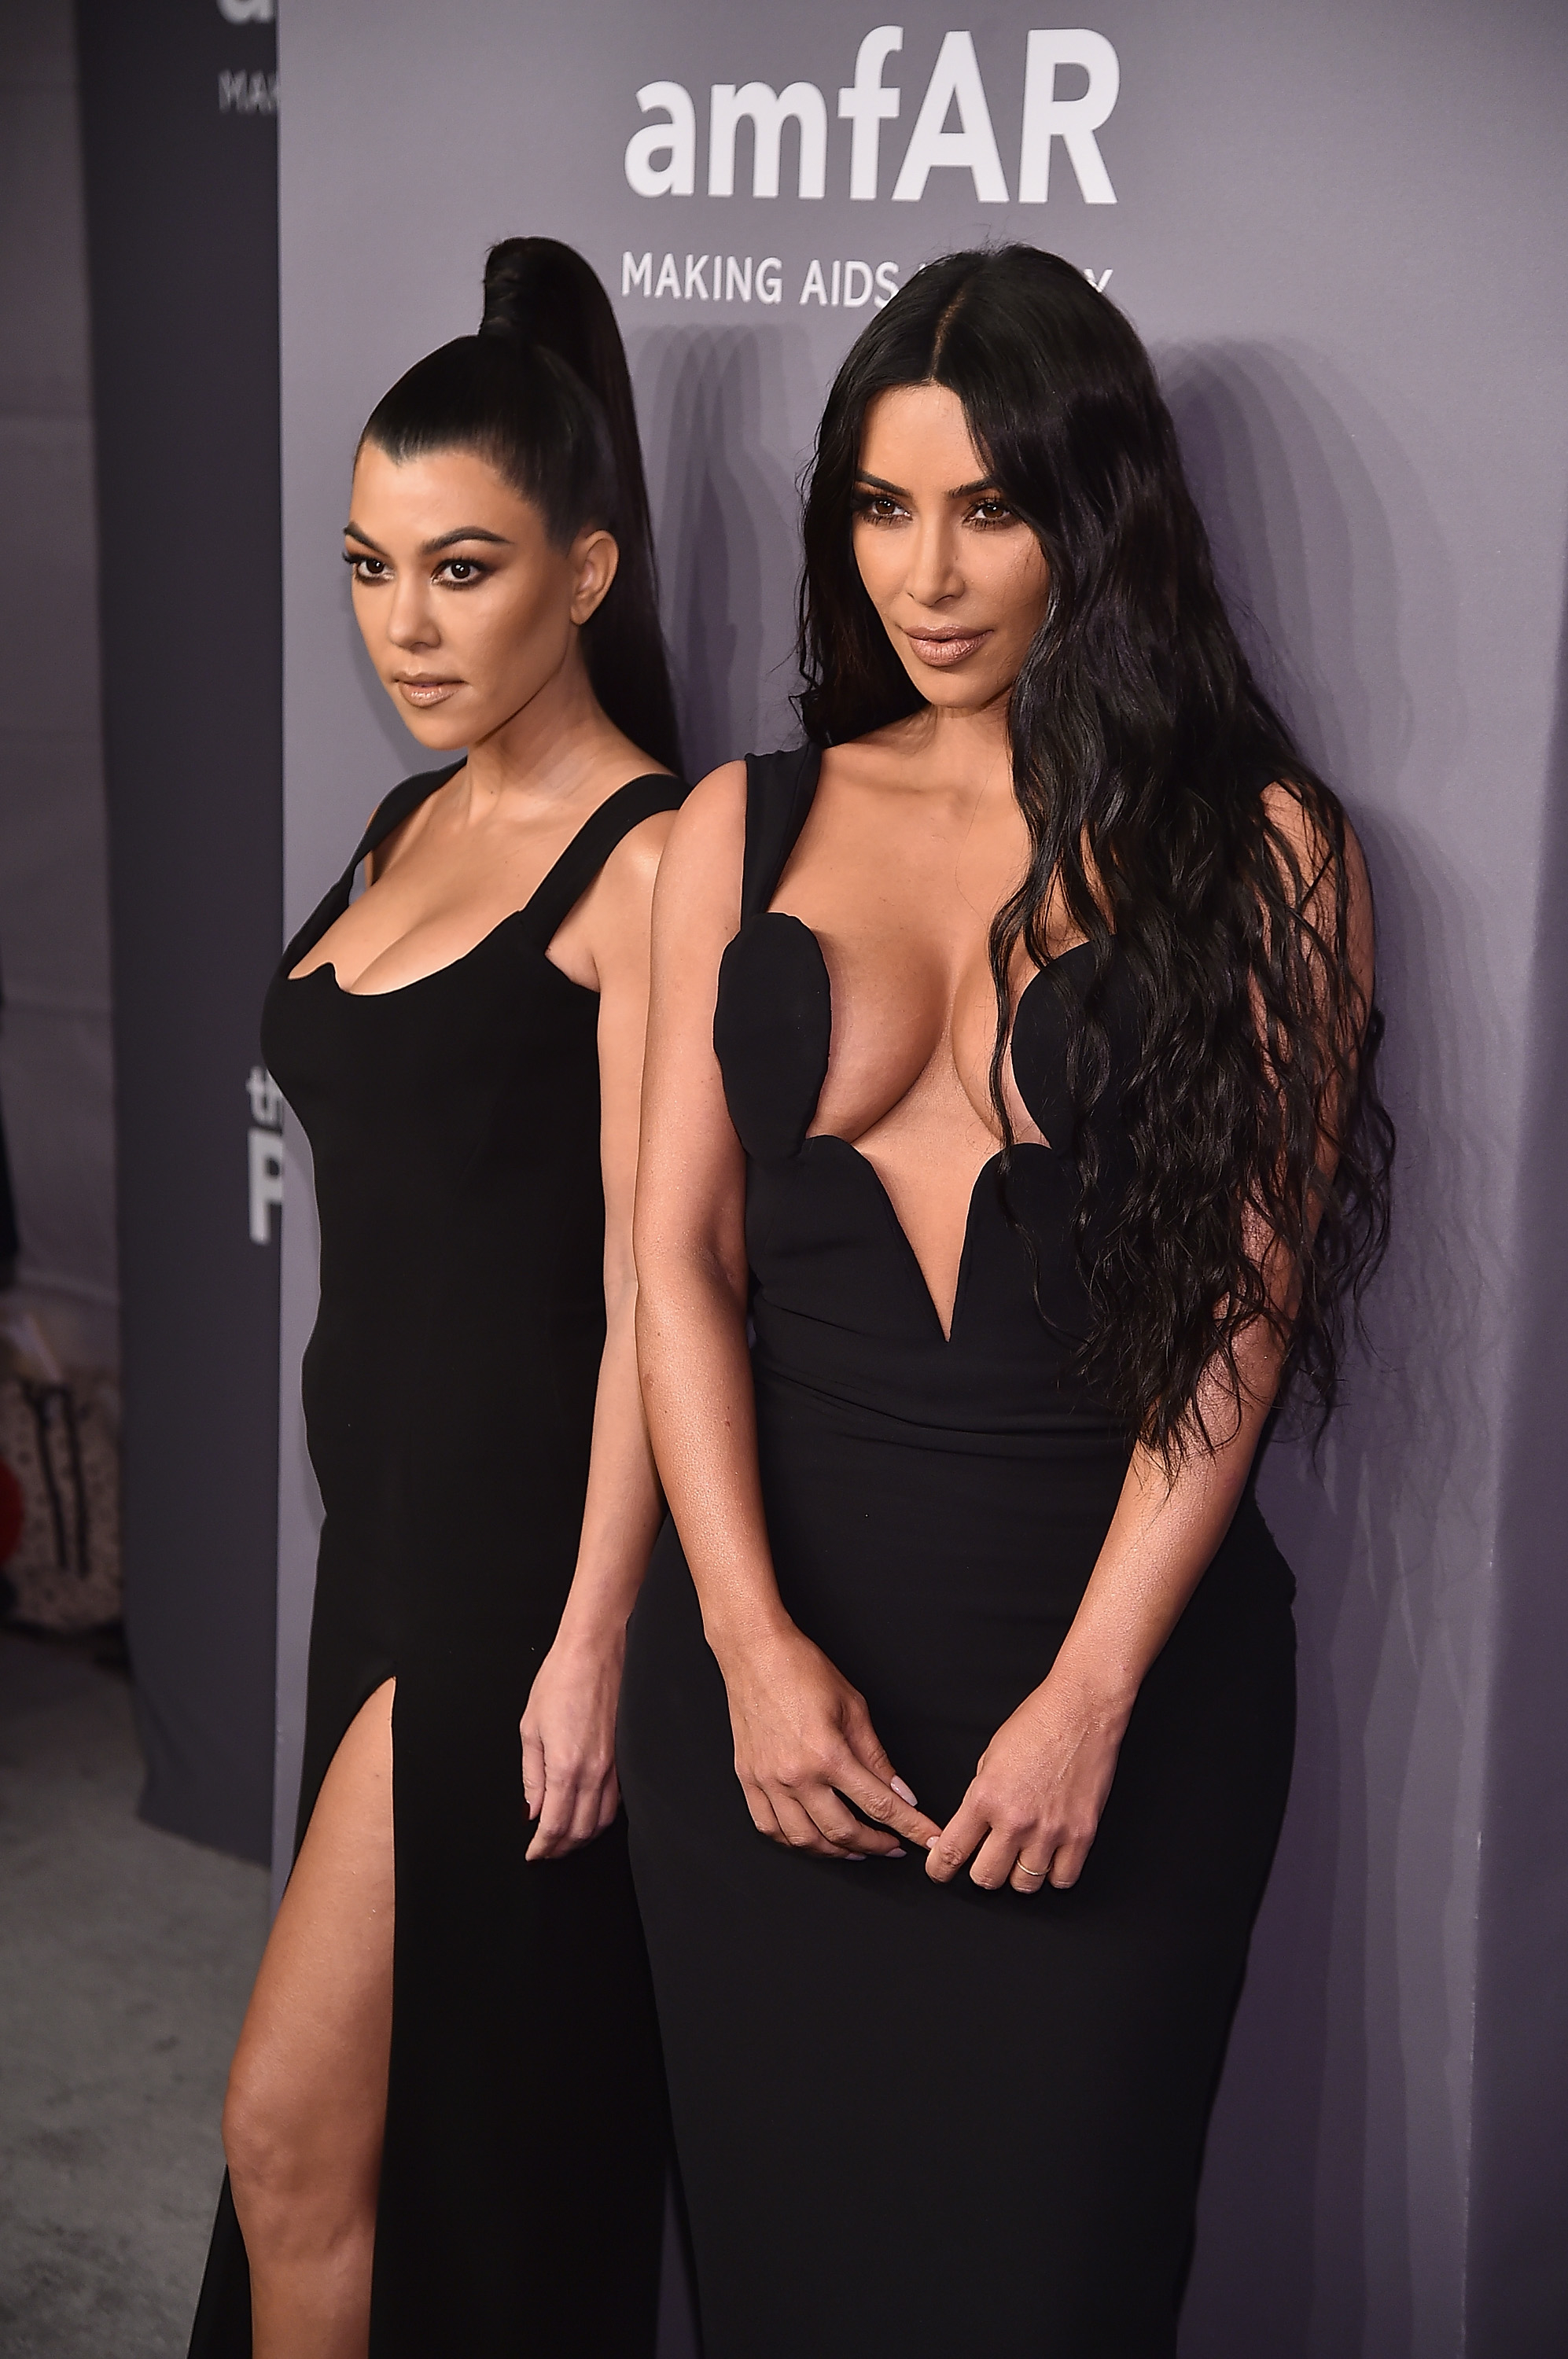 Kourtney and Kim at a media event